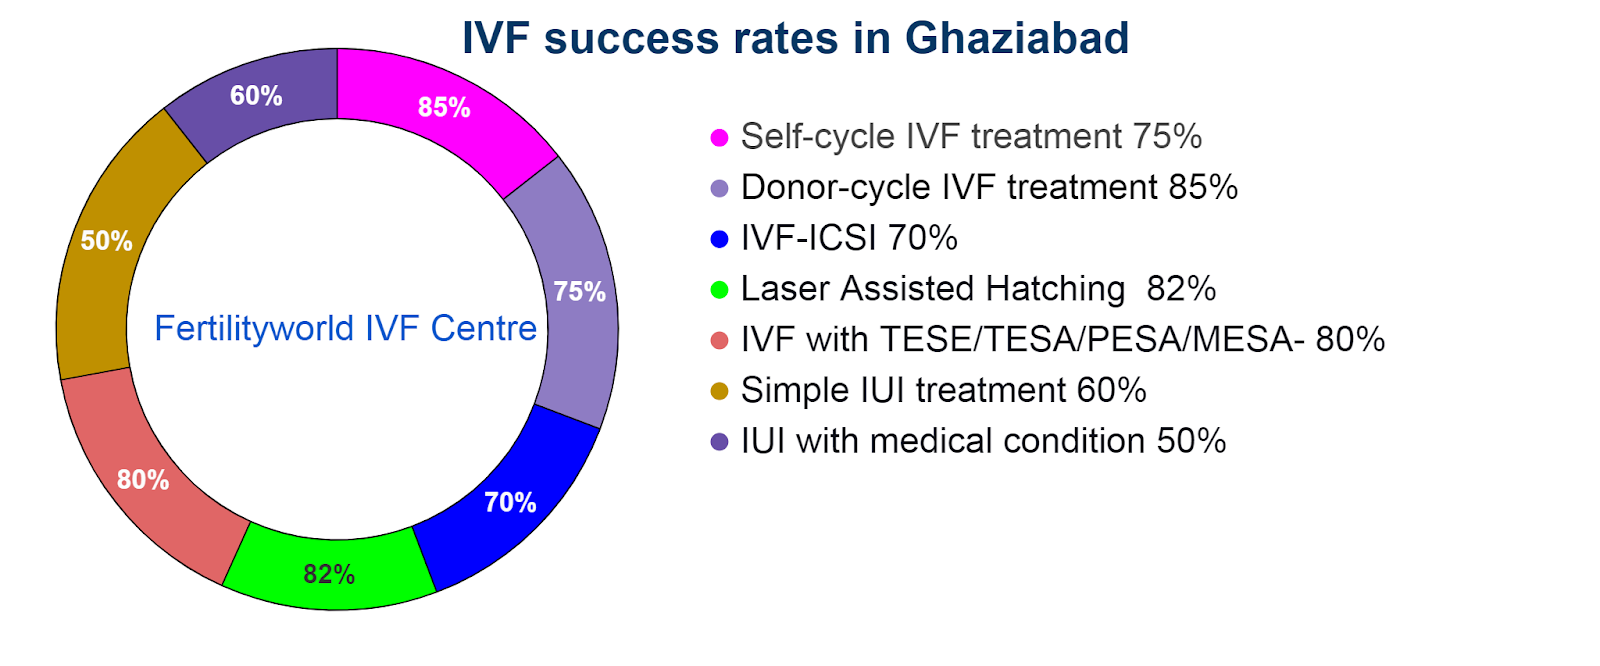 IVF success rate in Ghaziabad